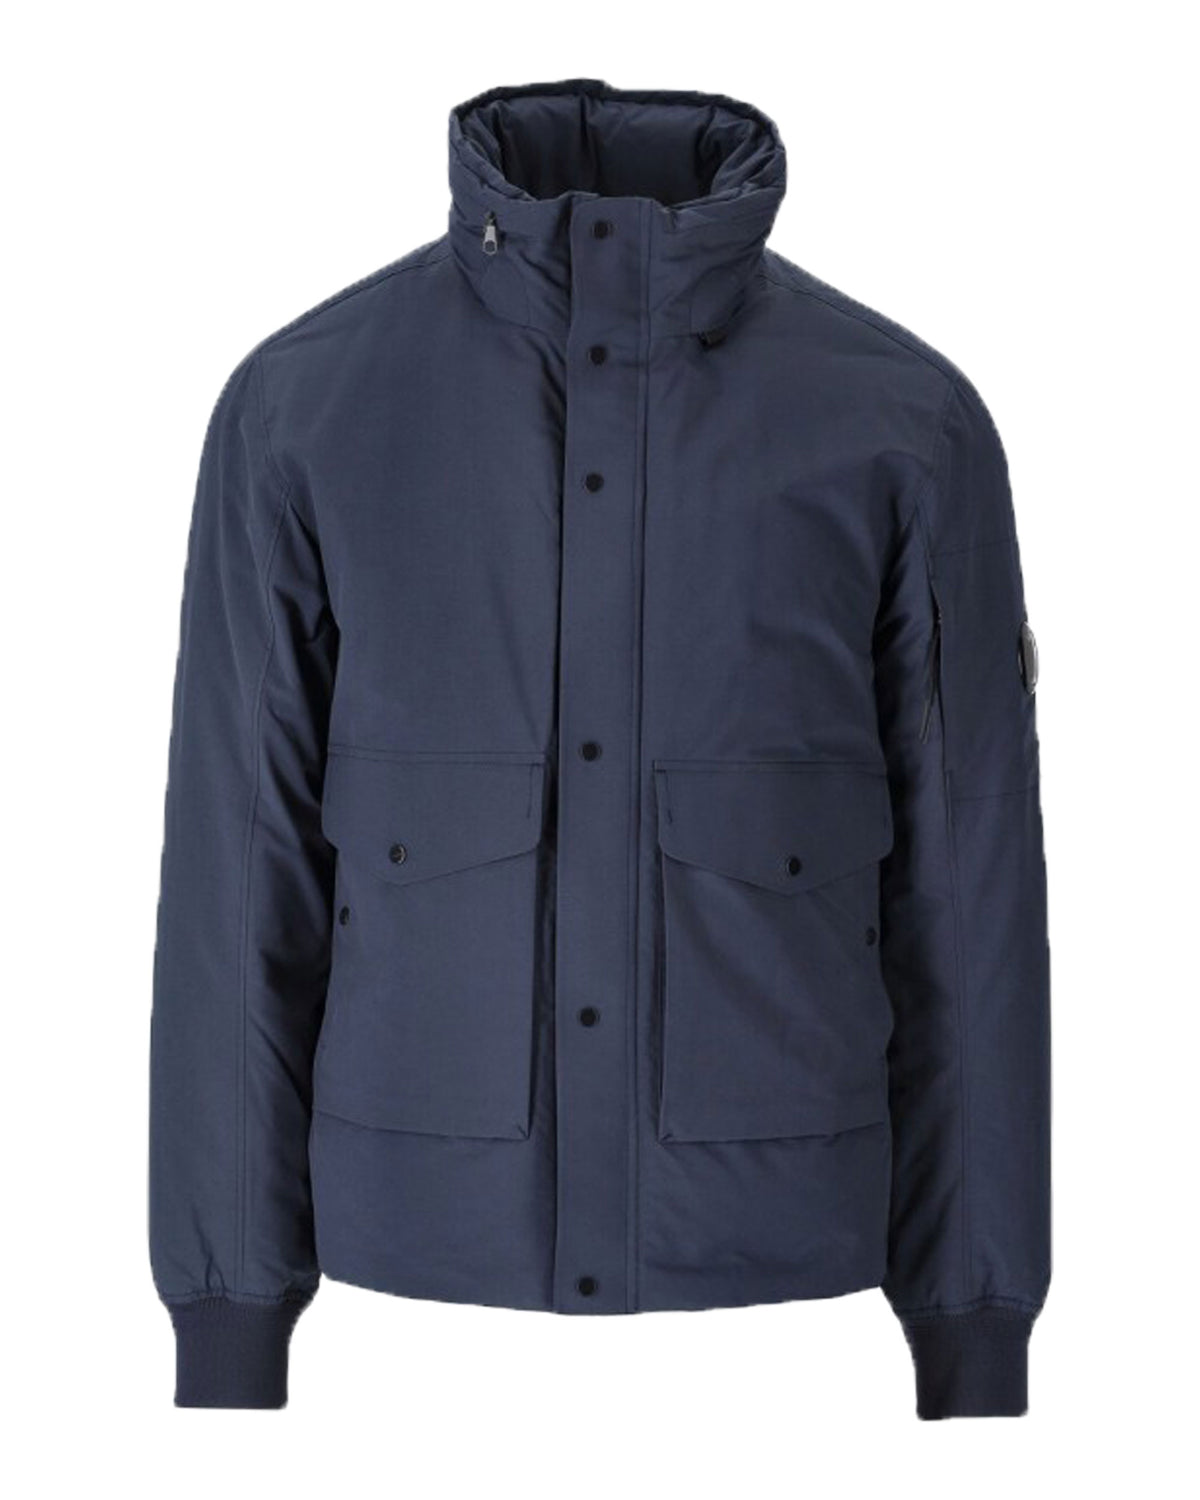 CP Company Outwear Short Jacket in Micro-M Total Eclipse